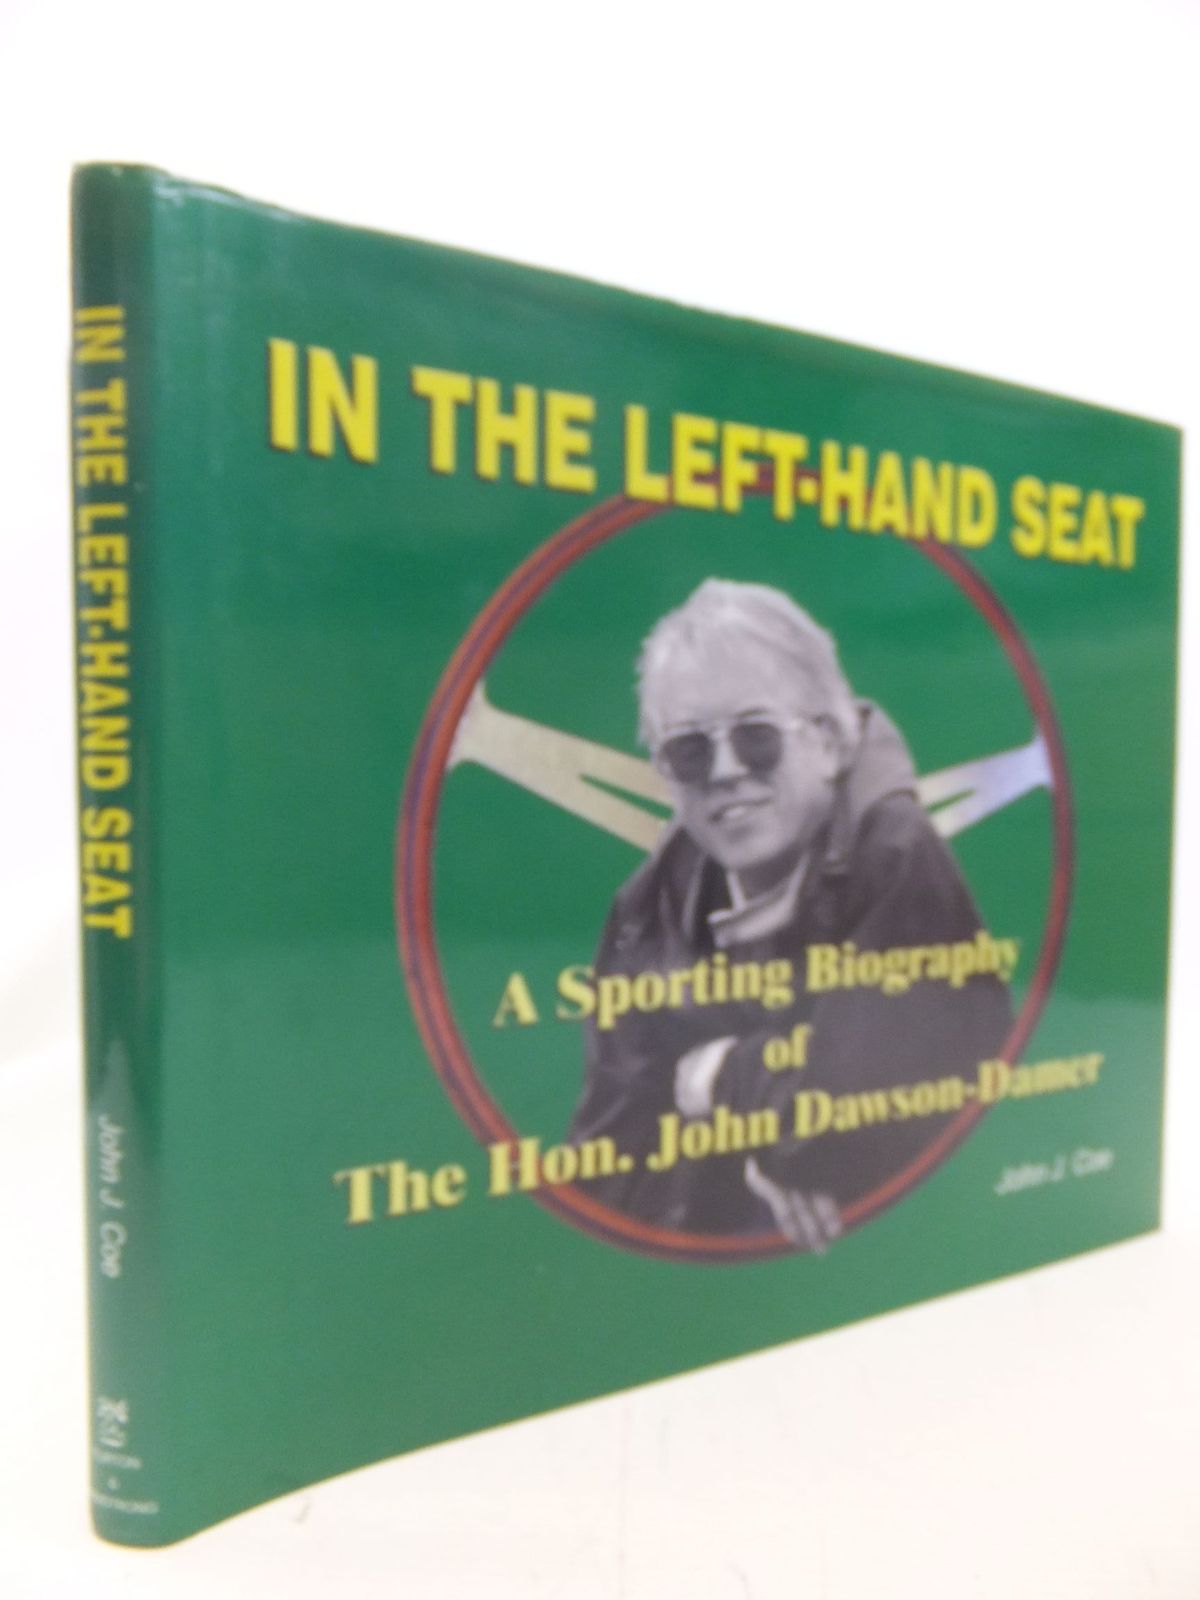 Photo of IN THE LEFT-HAND SEAT A SPORTING BIOGRAPHY OF THE HON. JOHN DAWSON-DAMER written by Coe, John J. published by Turton &amp; Armstrong (STOCK CODE: 1711235)  for sale by Stella & Rose's Books